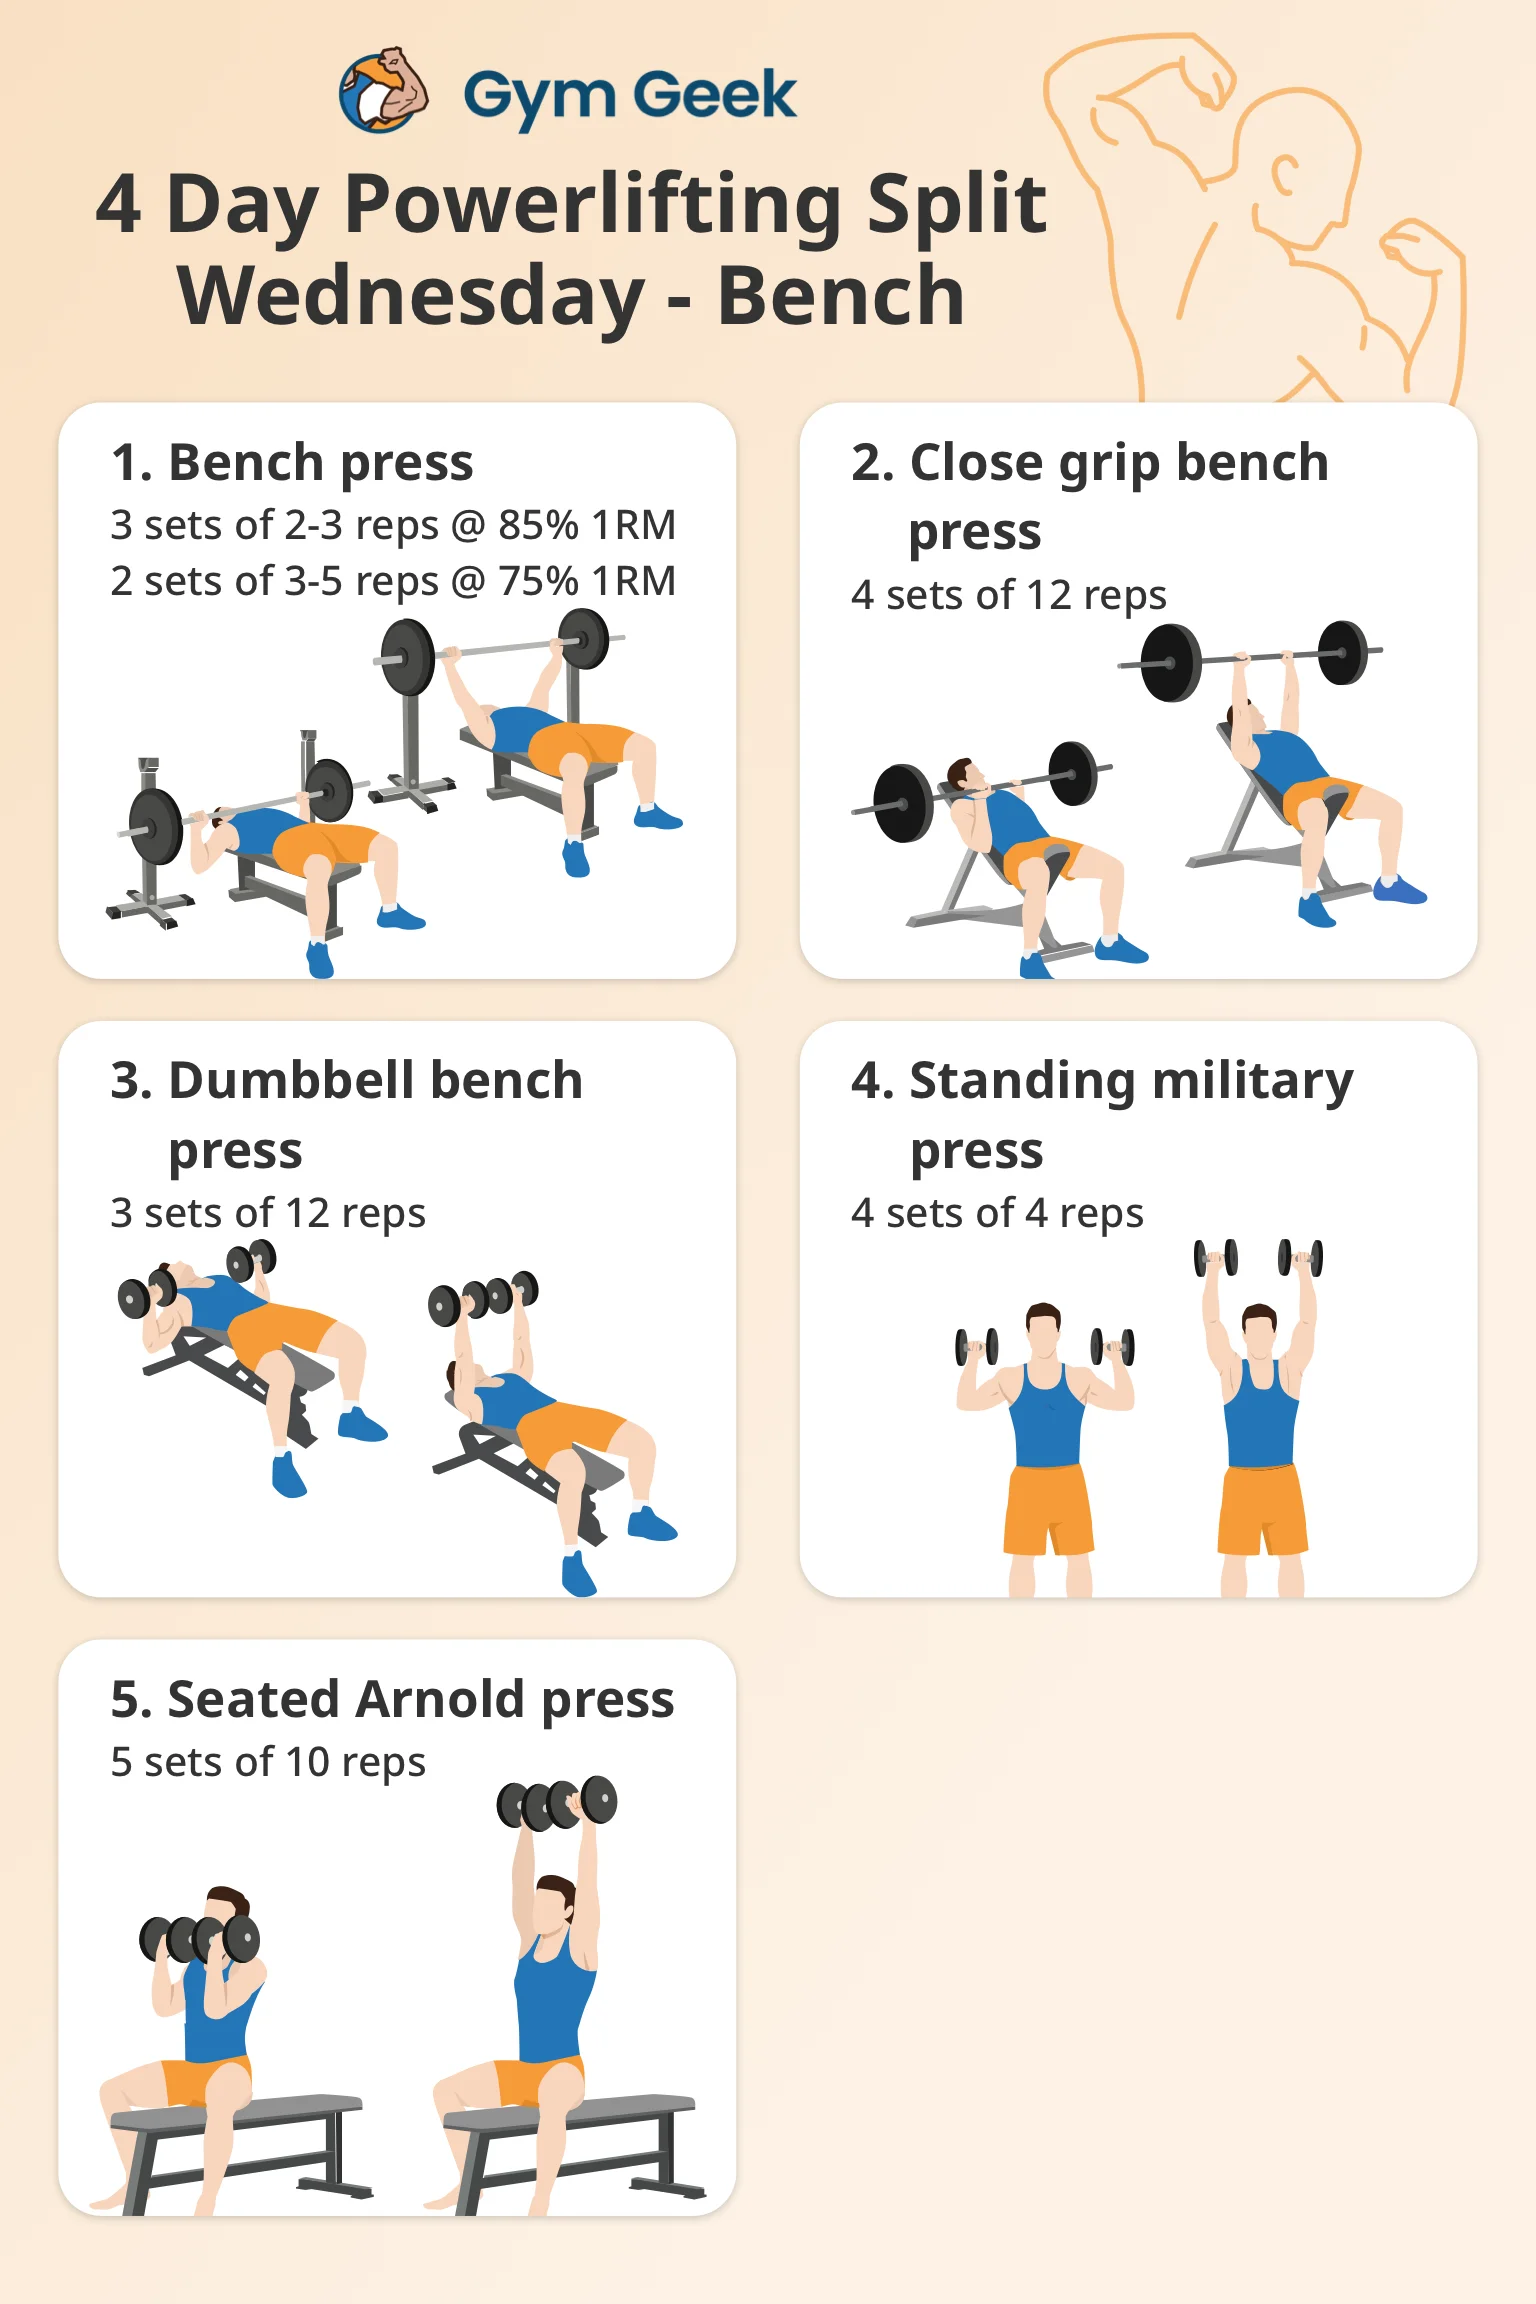 infographic - 4 day powerlifting program - Wednesday (Bench day)